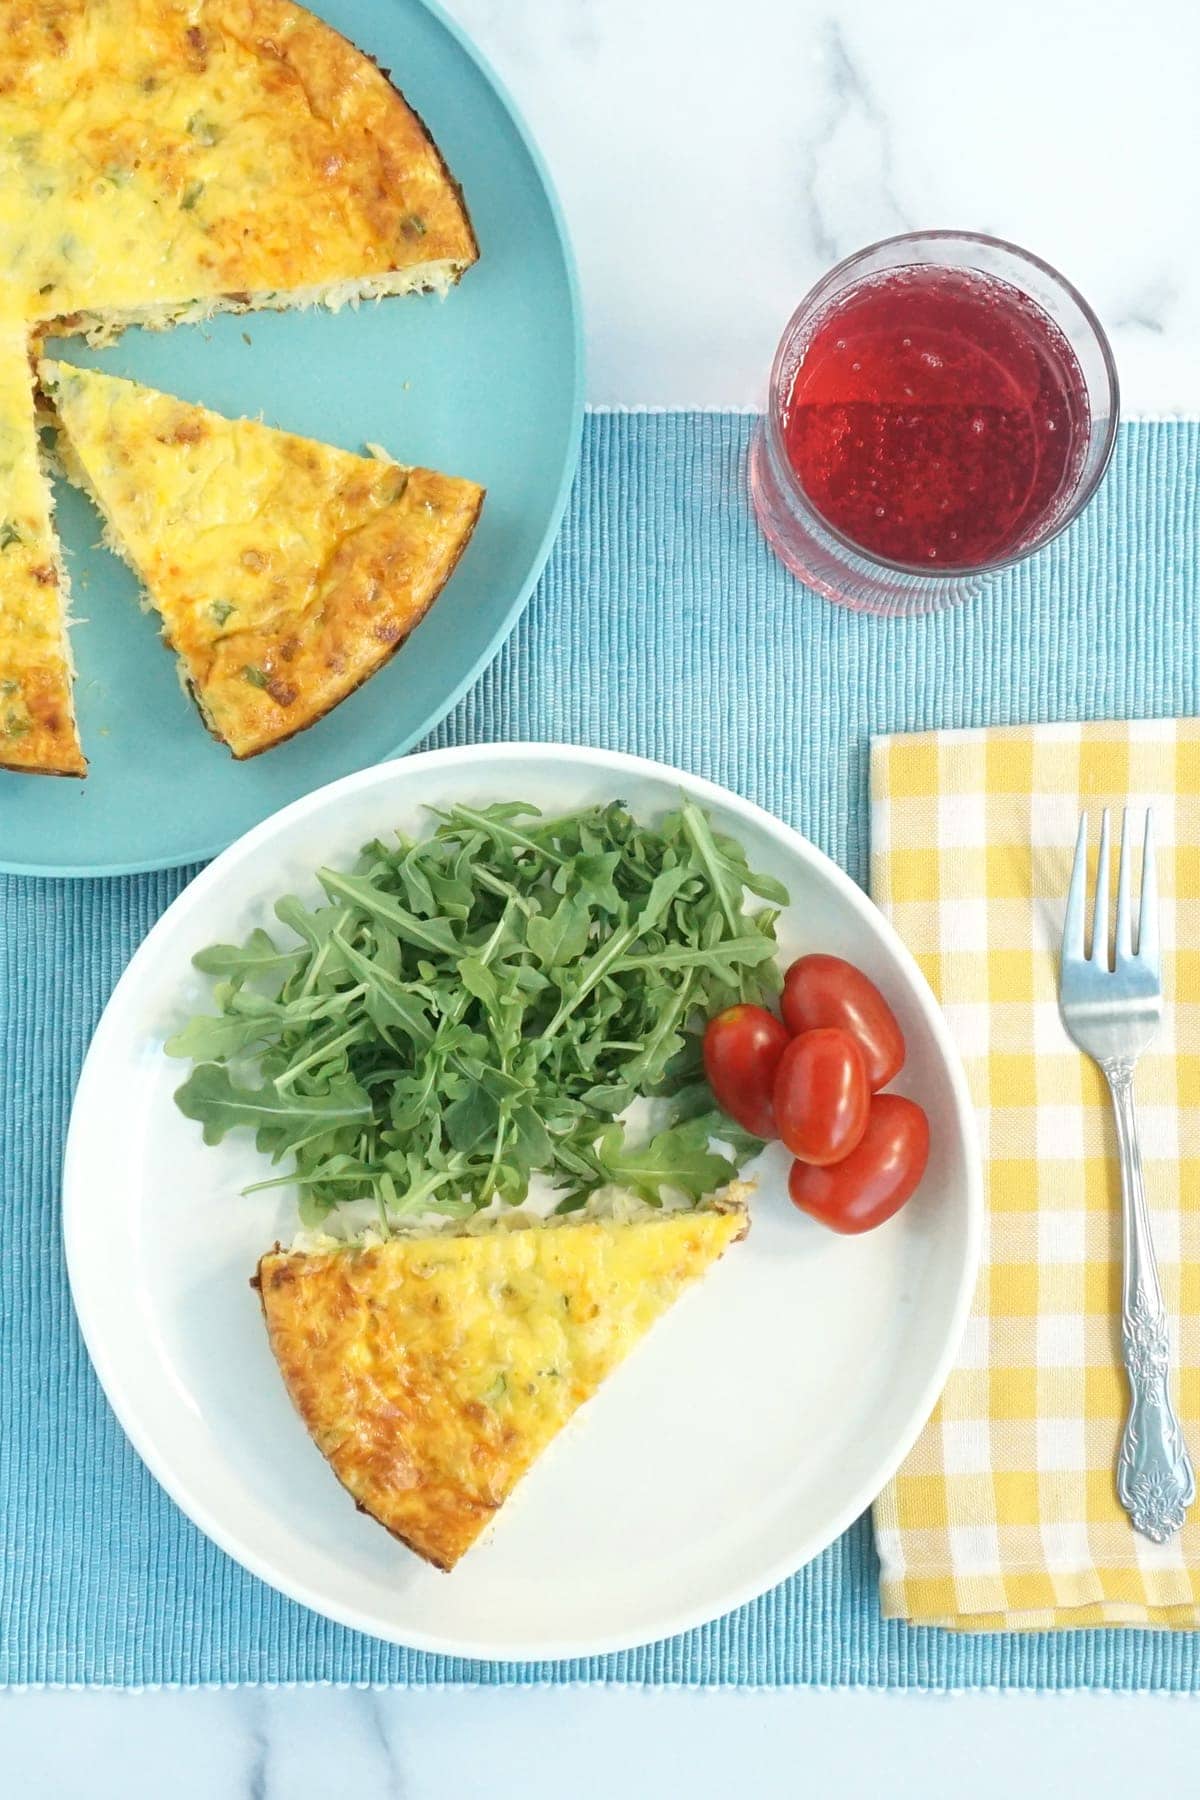 Plate of quiche with arugula and tomato on the side